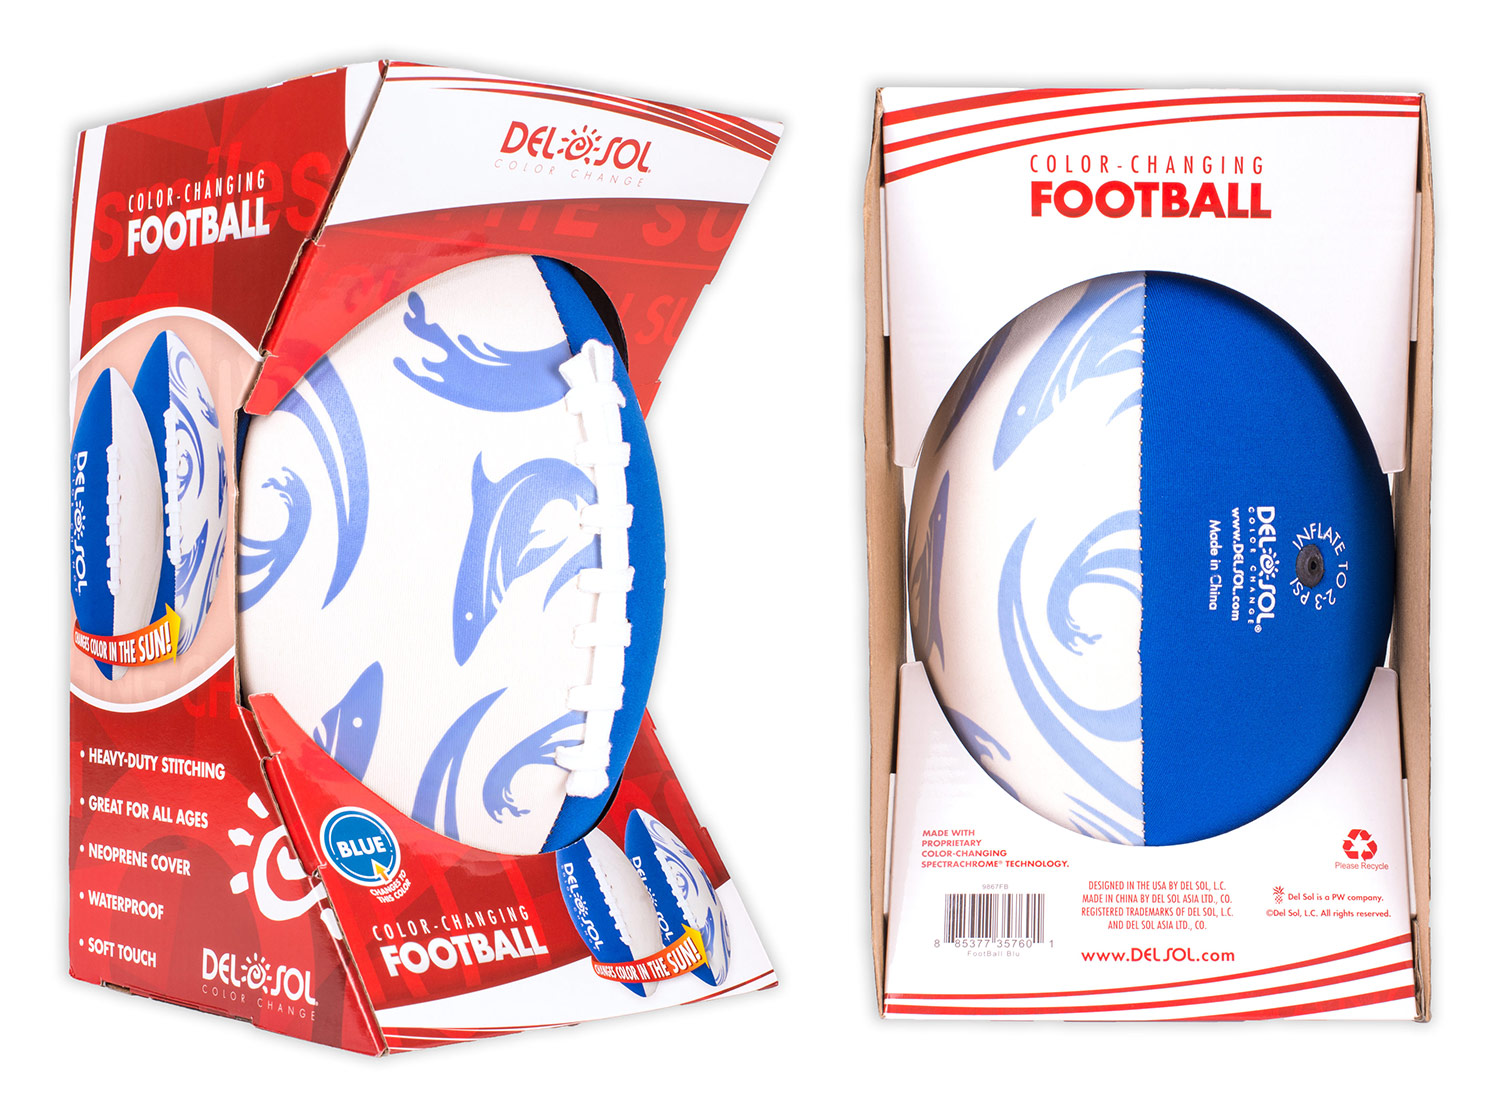 Created new football packaging to match the look & feel of our other products, while providing something sporty to appeal to kids and parents.